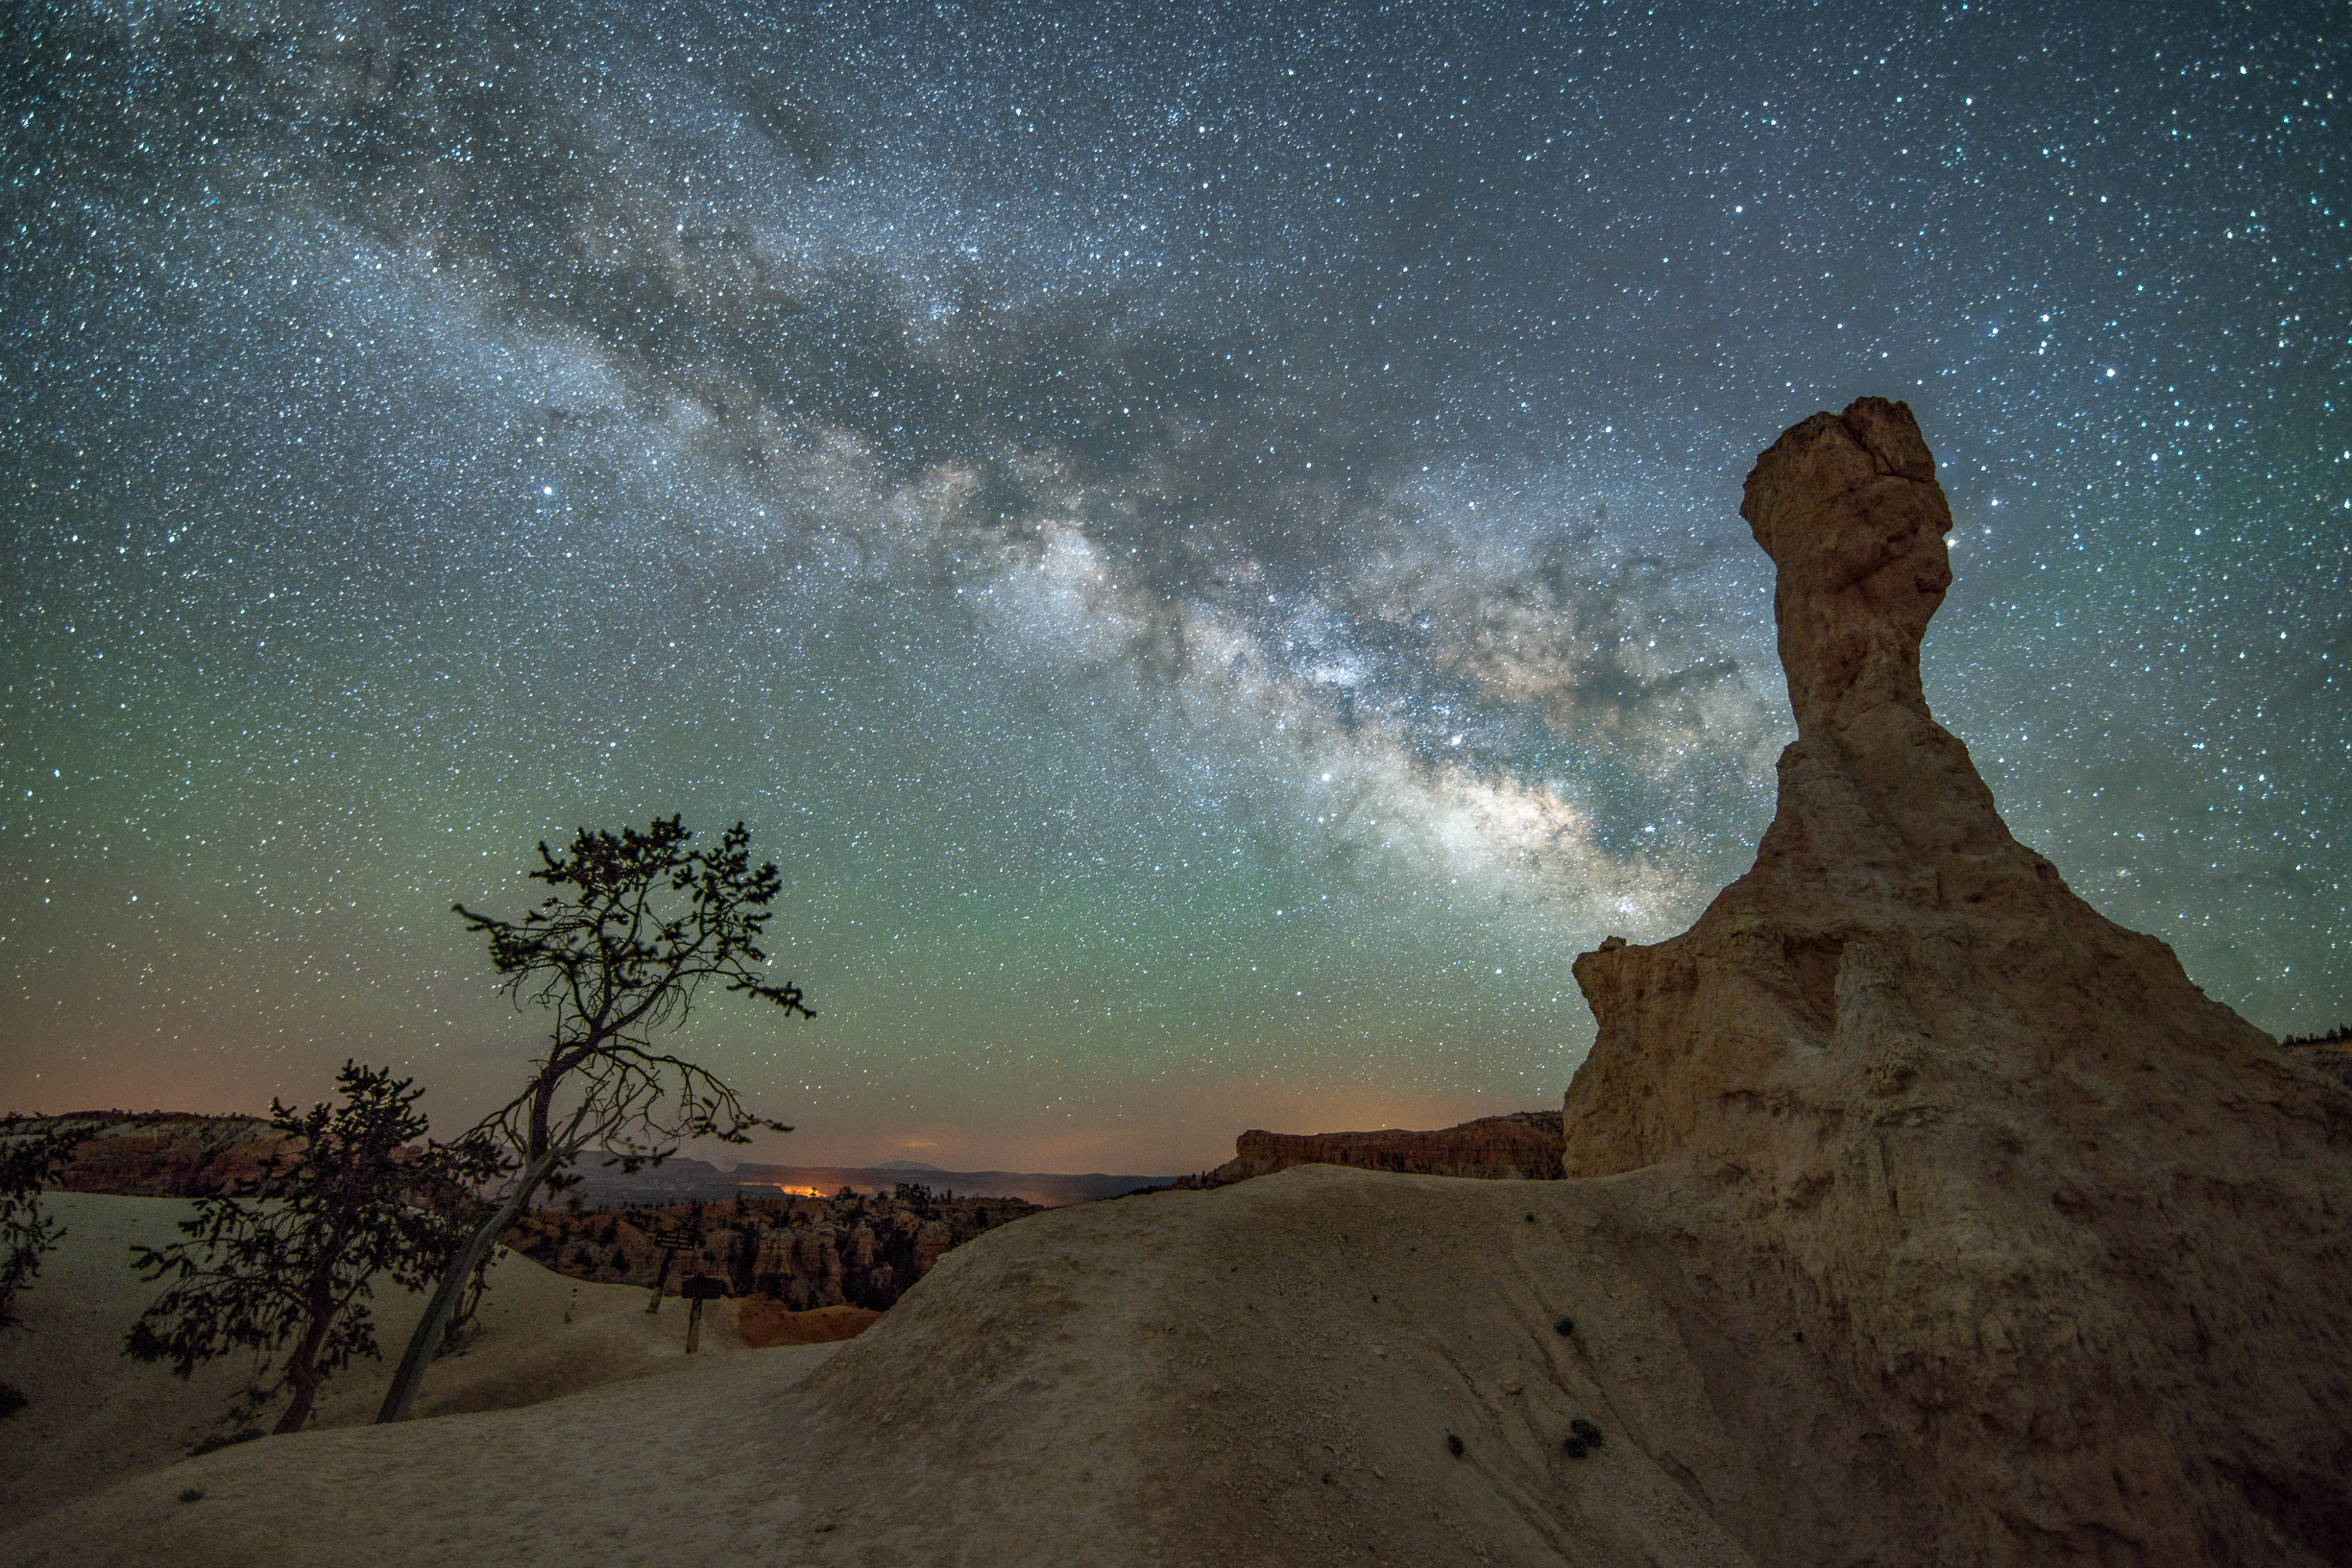 Hoodoo in Bryce Canyon with Milky Way and Tree